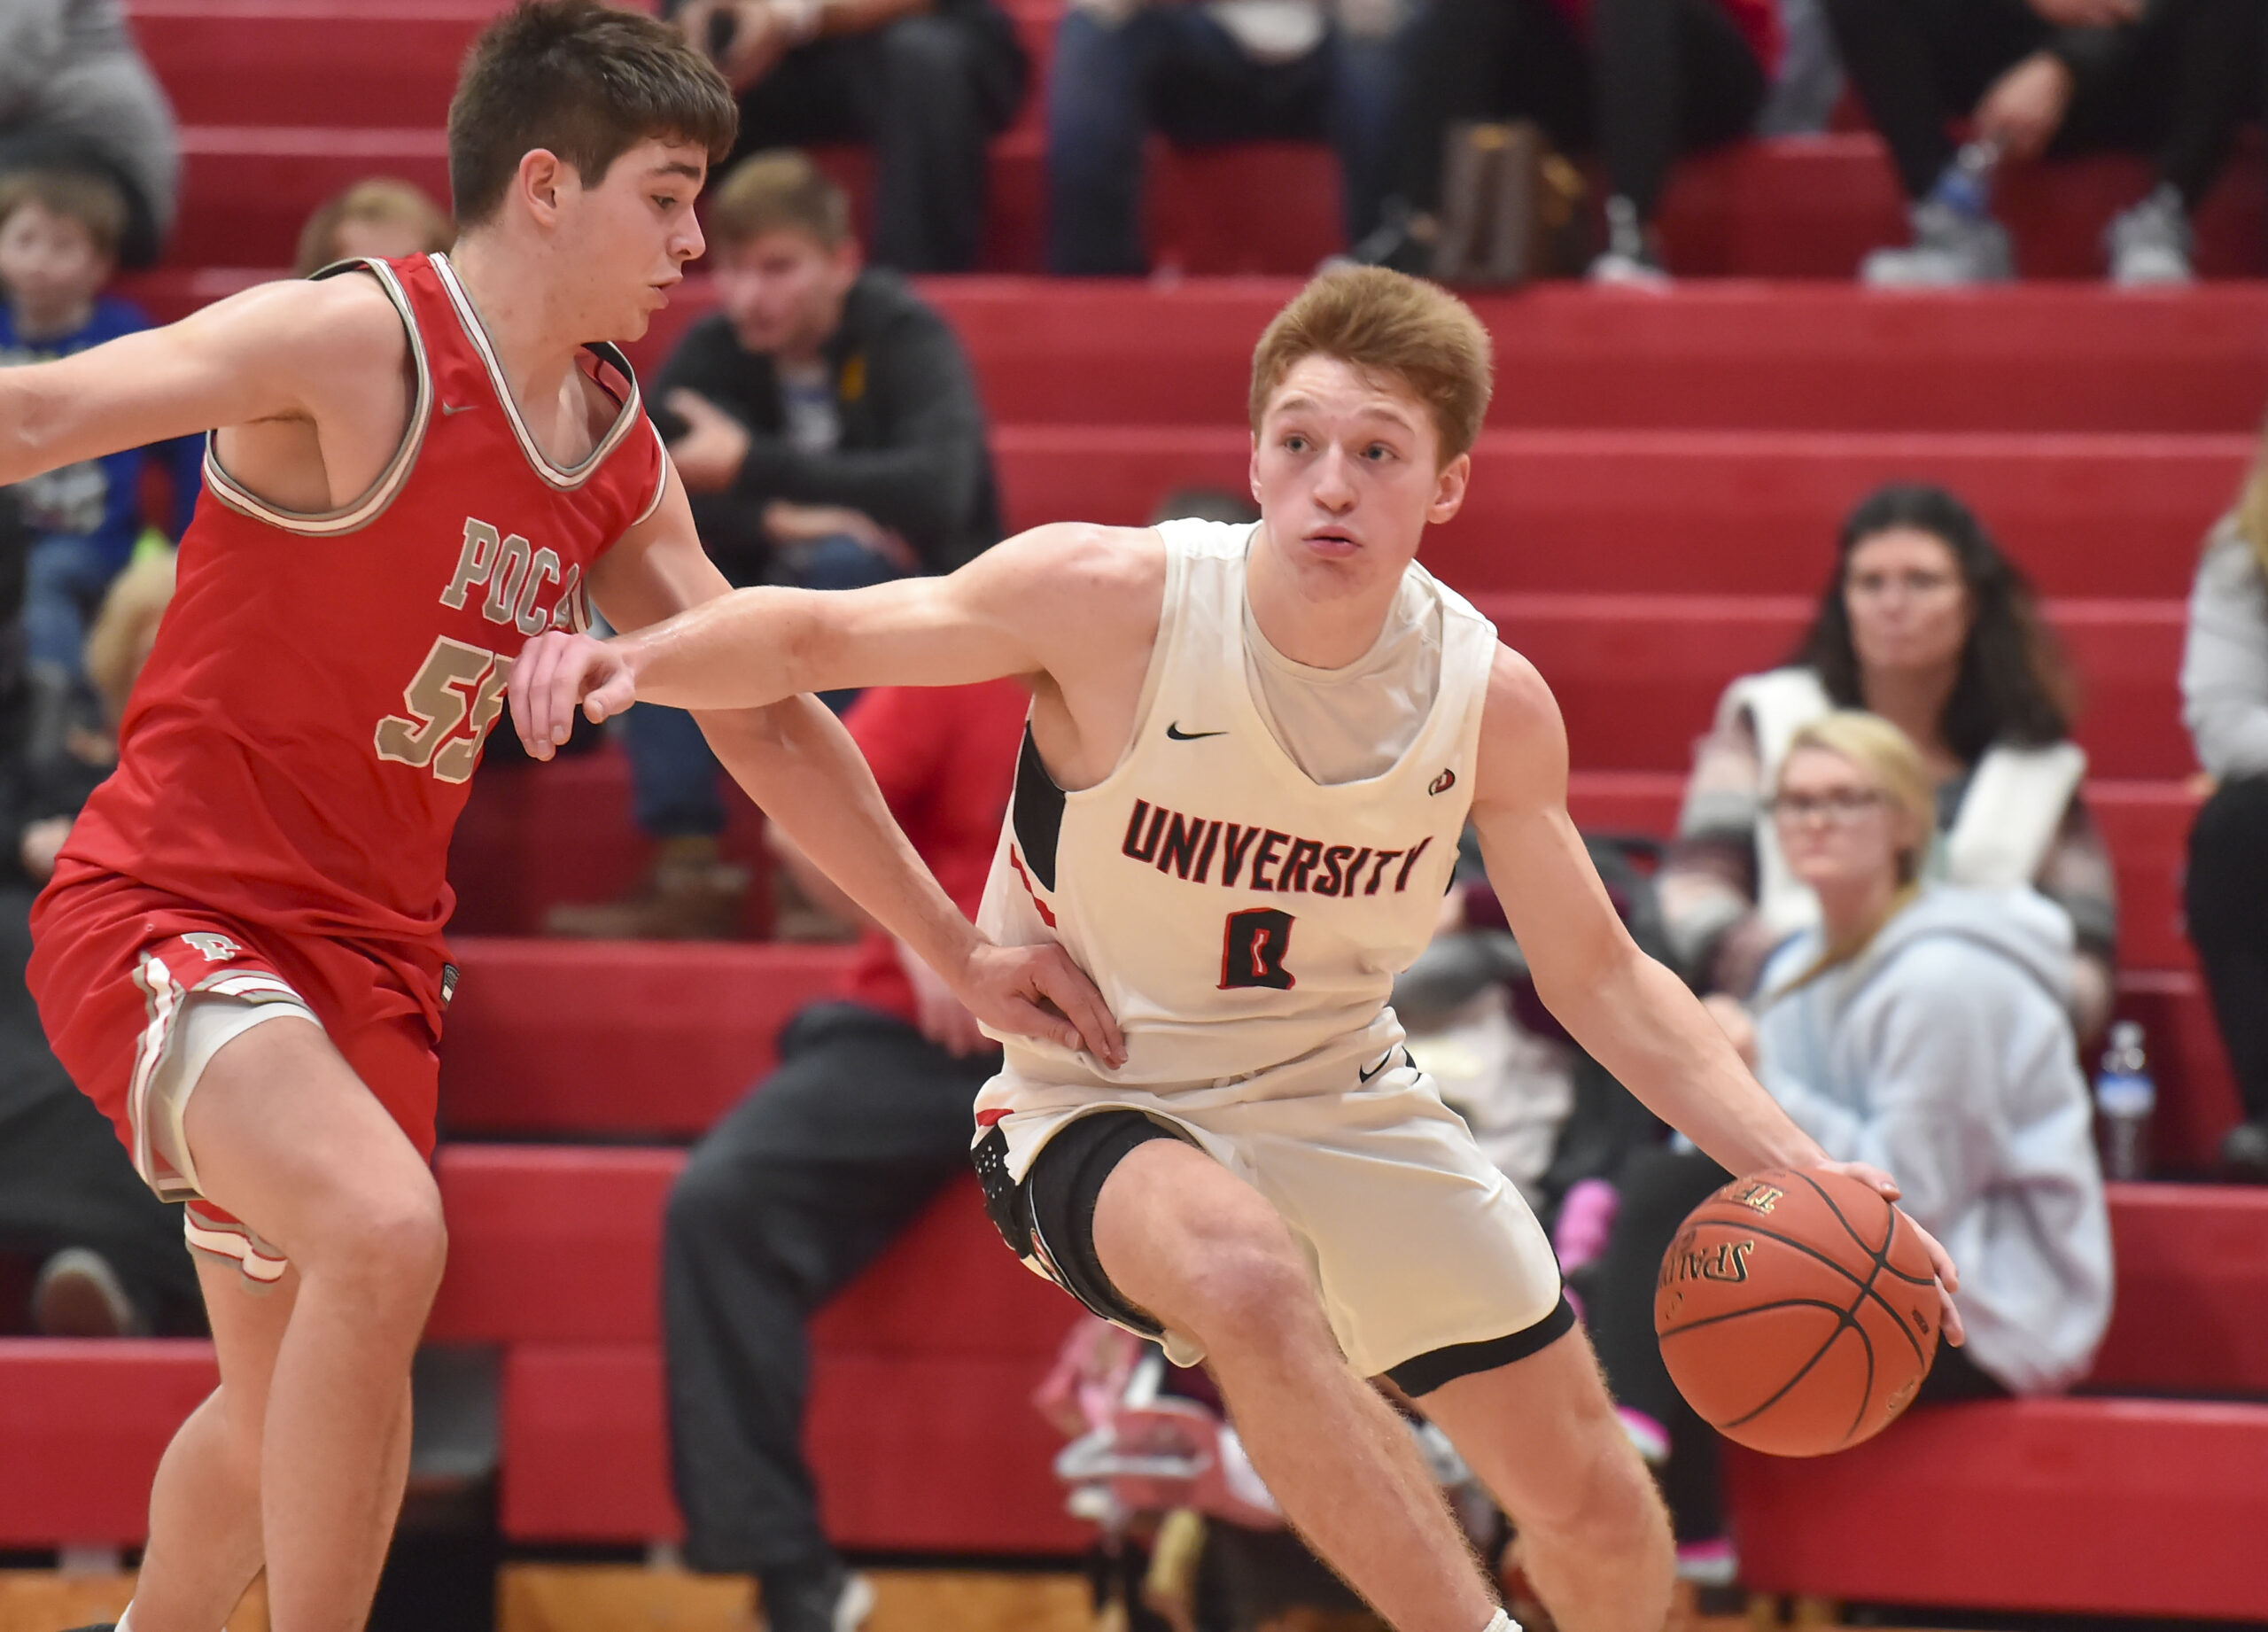 University's K.J. McClurg (0) scored 16 points in the fourth quarter, but his defense against Poca was what caught everyone's attention (William Wotring/The Dominion Post)